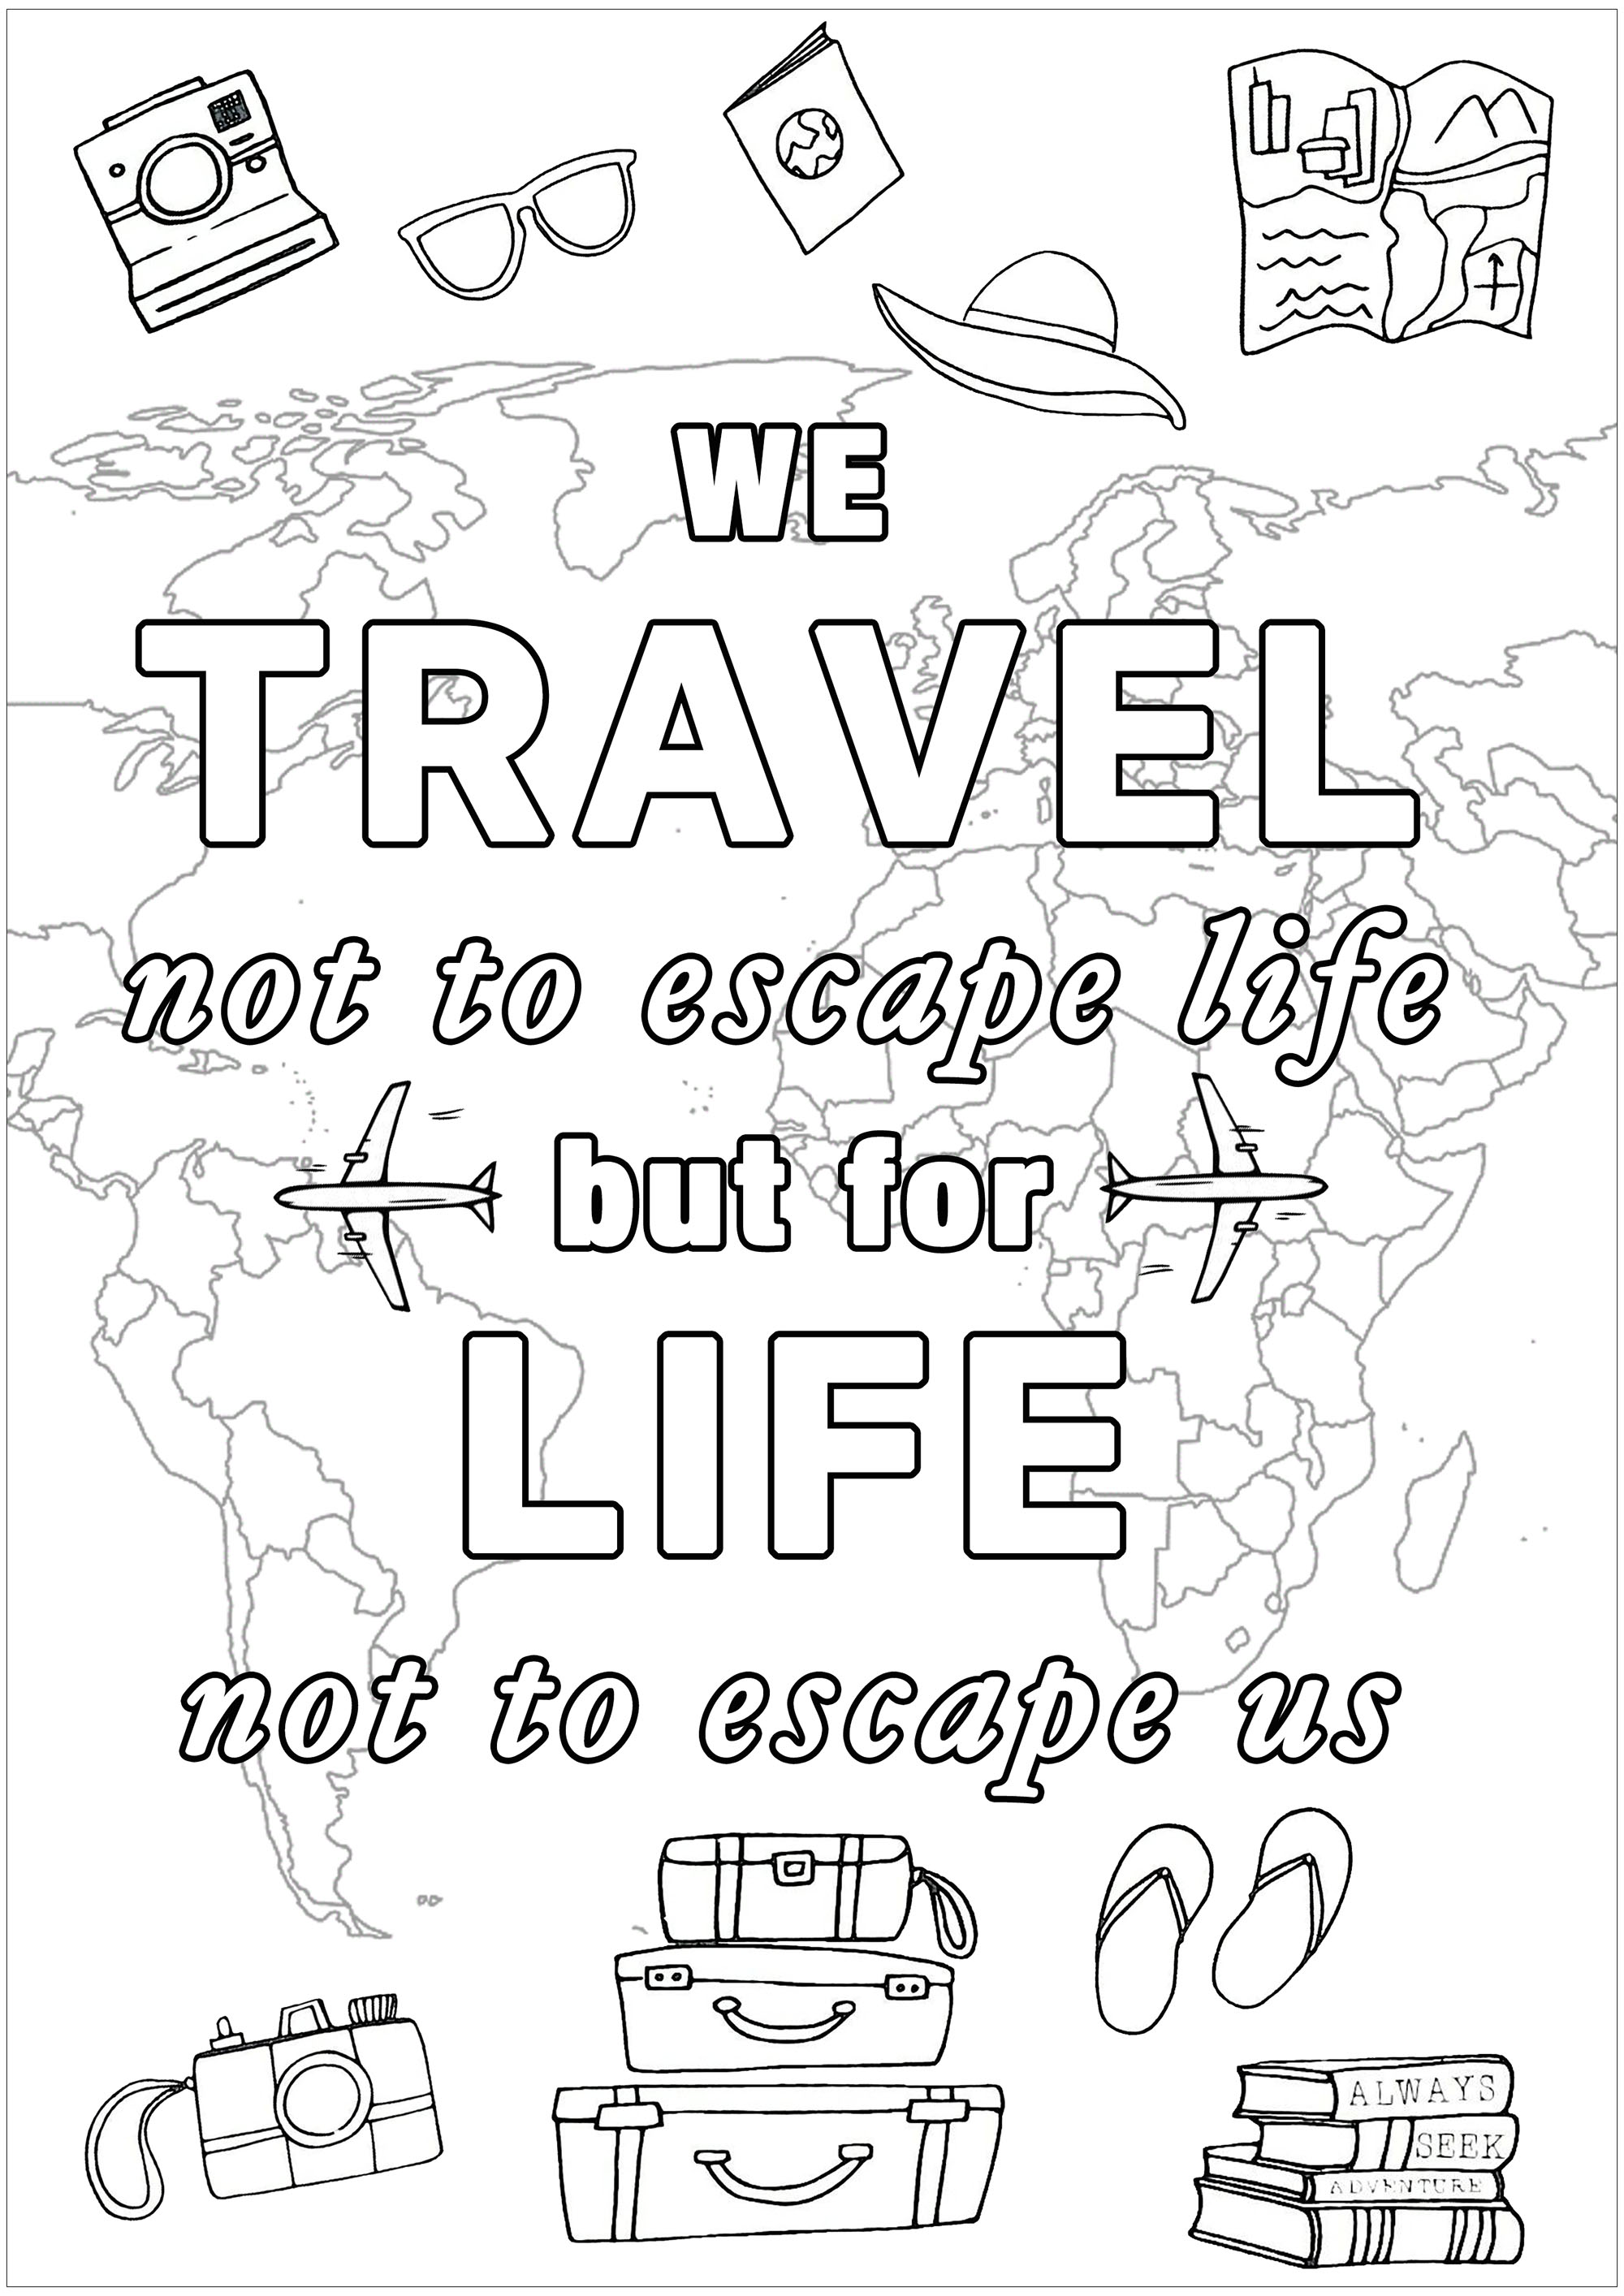 We travel not to escape life ... but life not to escape us, Artist : Olivier